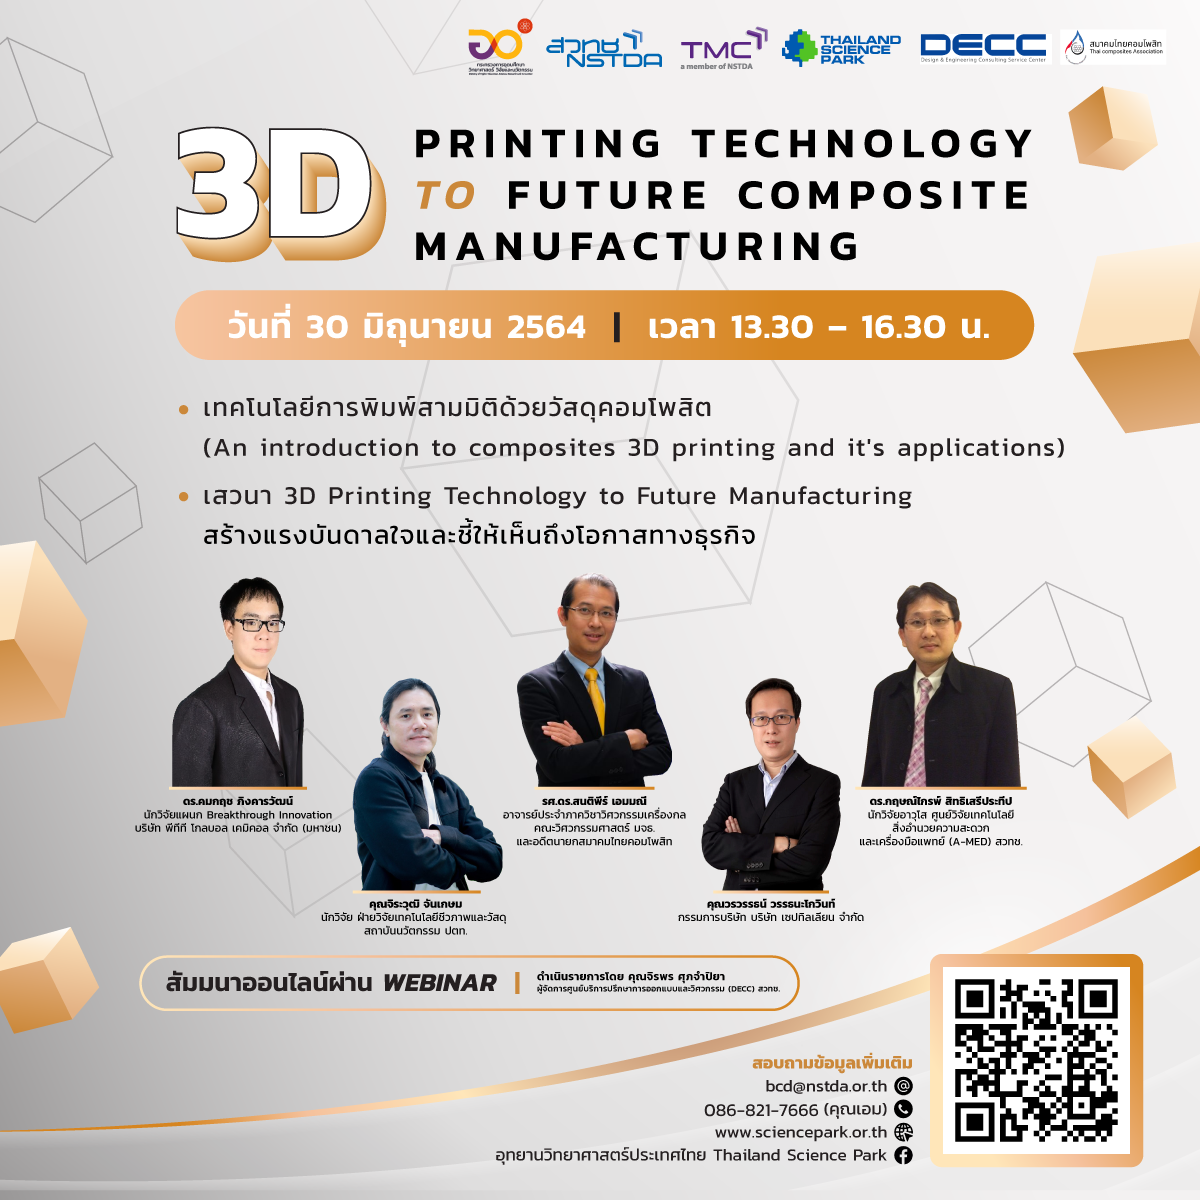 3D Printing Technology to Future Composite Manufacturing